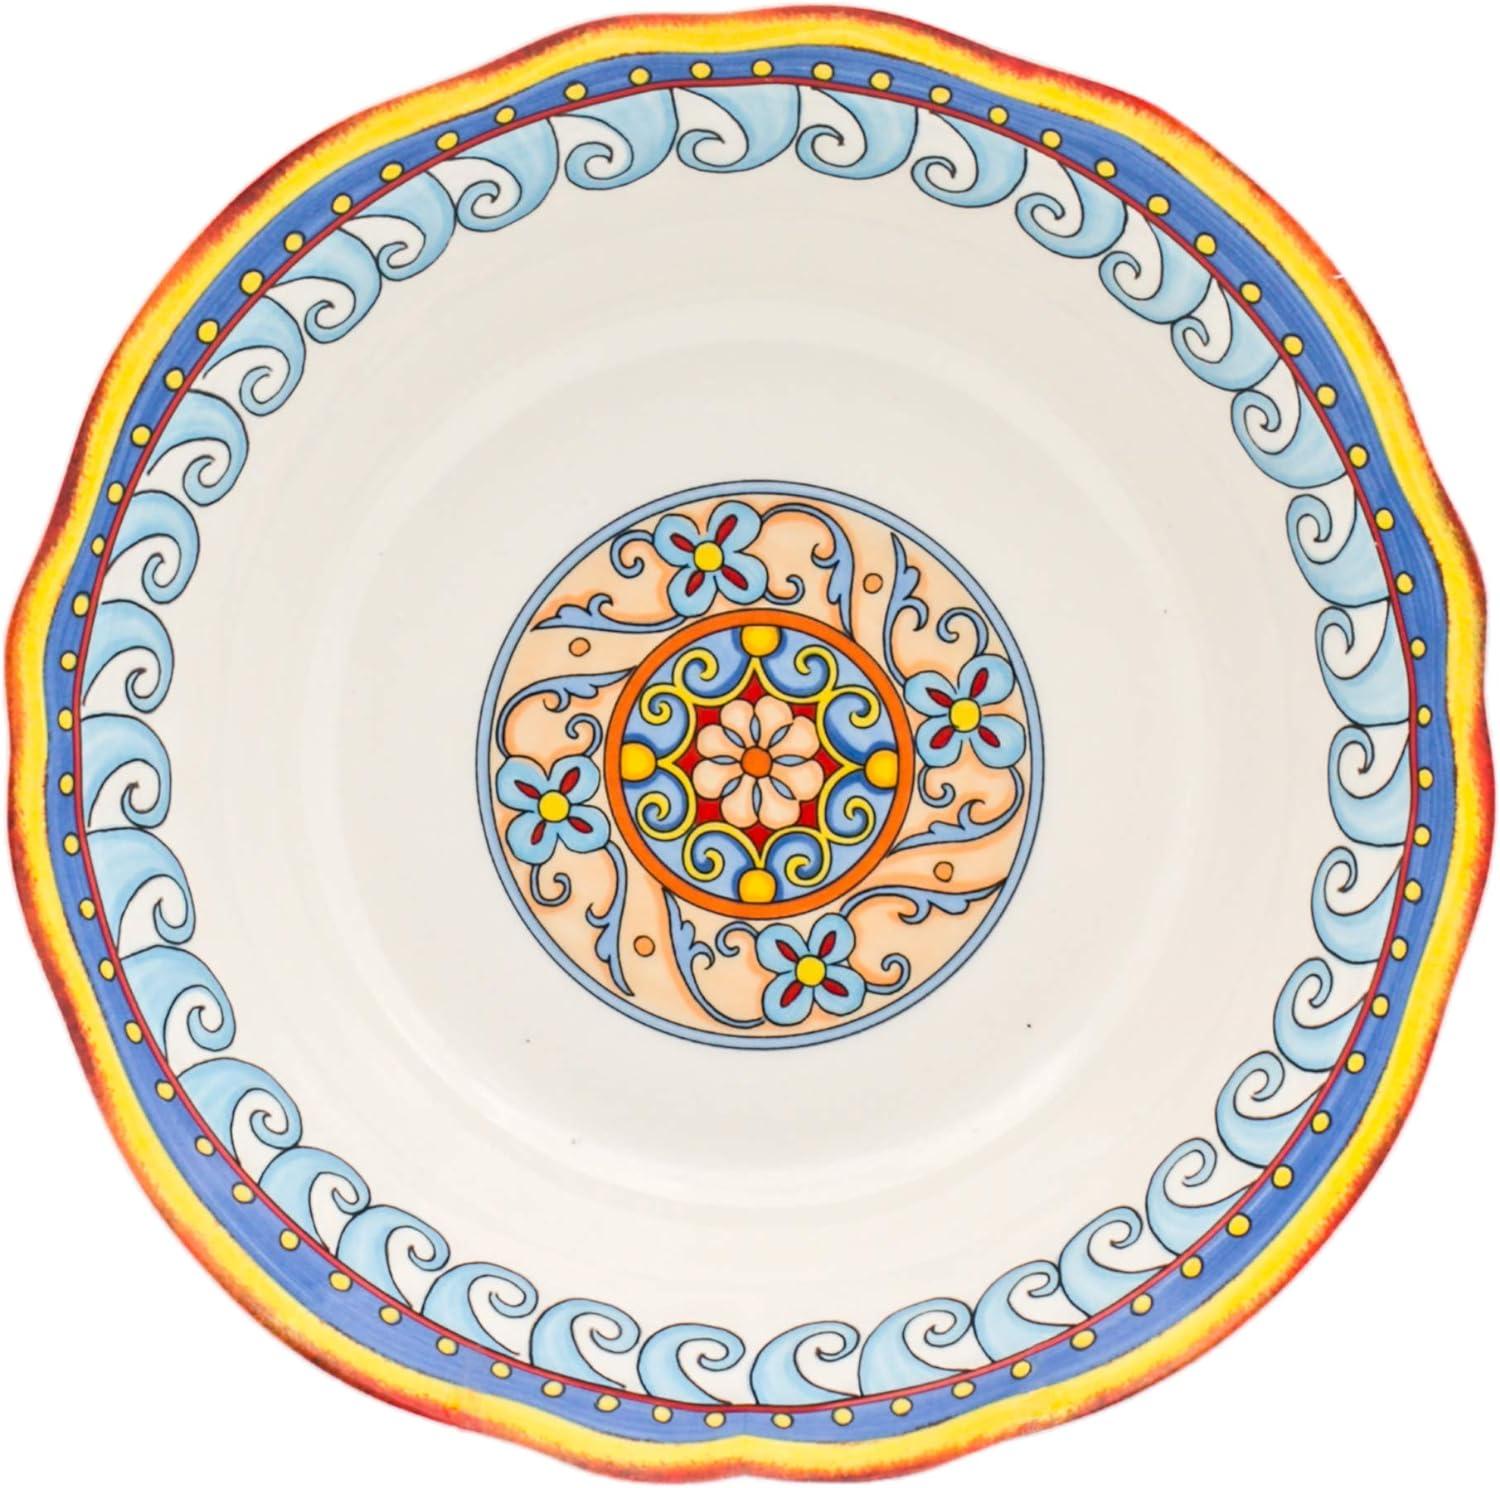 Renaissance-Inspired 10" Multicolor Ceramic Serving Bowl with Scalloped Edge